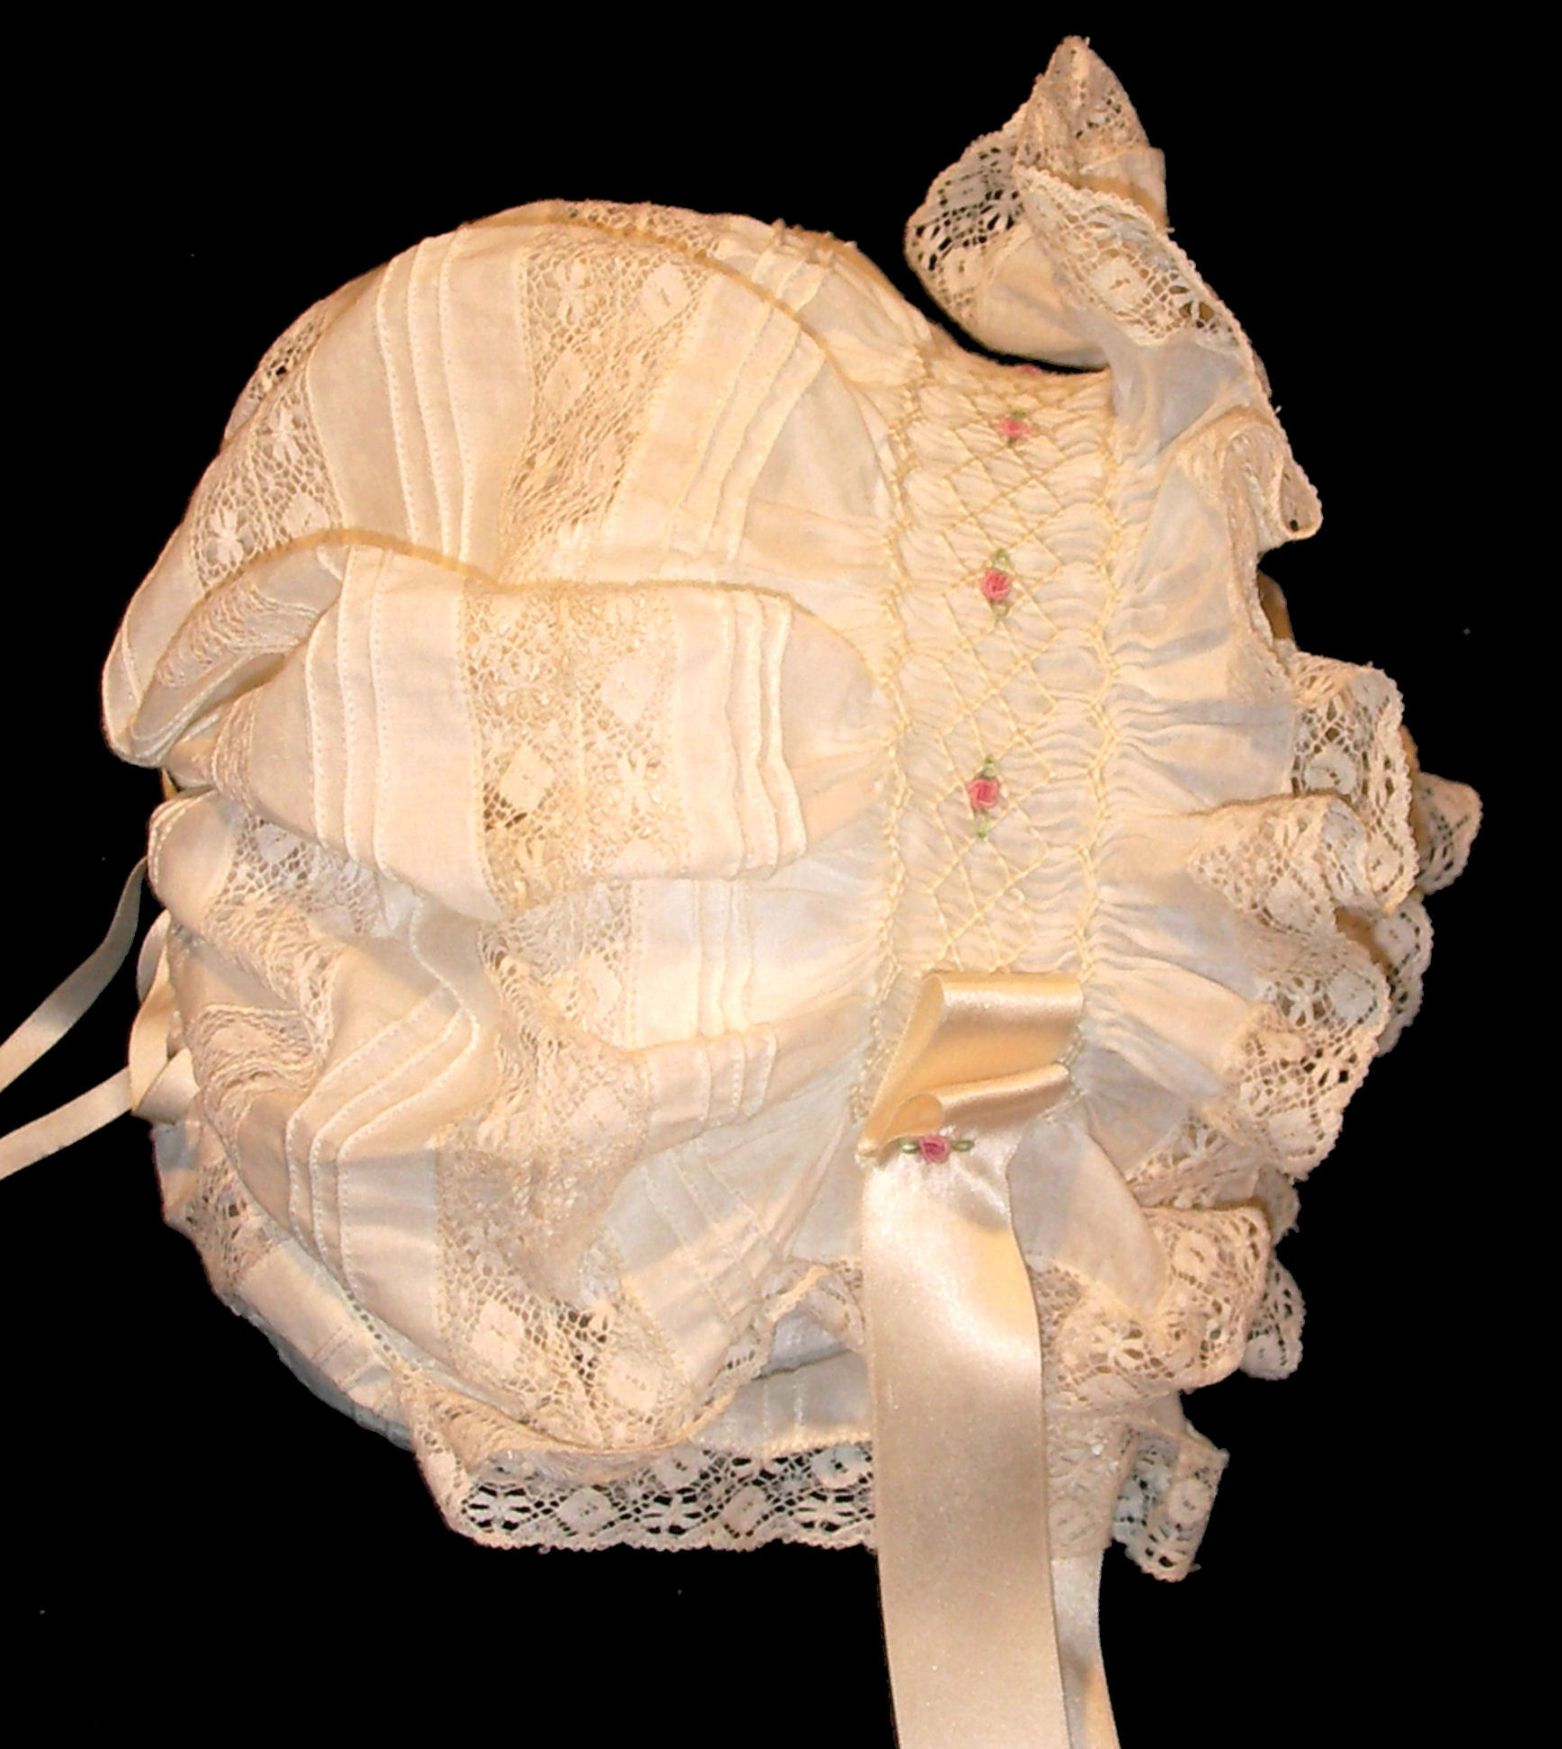 Hand Smocked Baby's Bonnet - Anna Marie